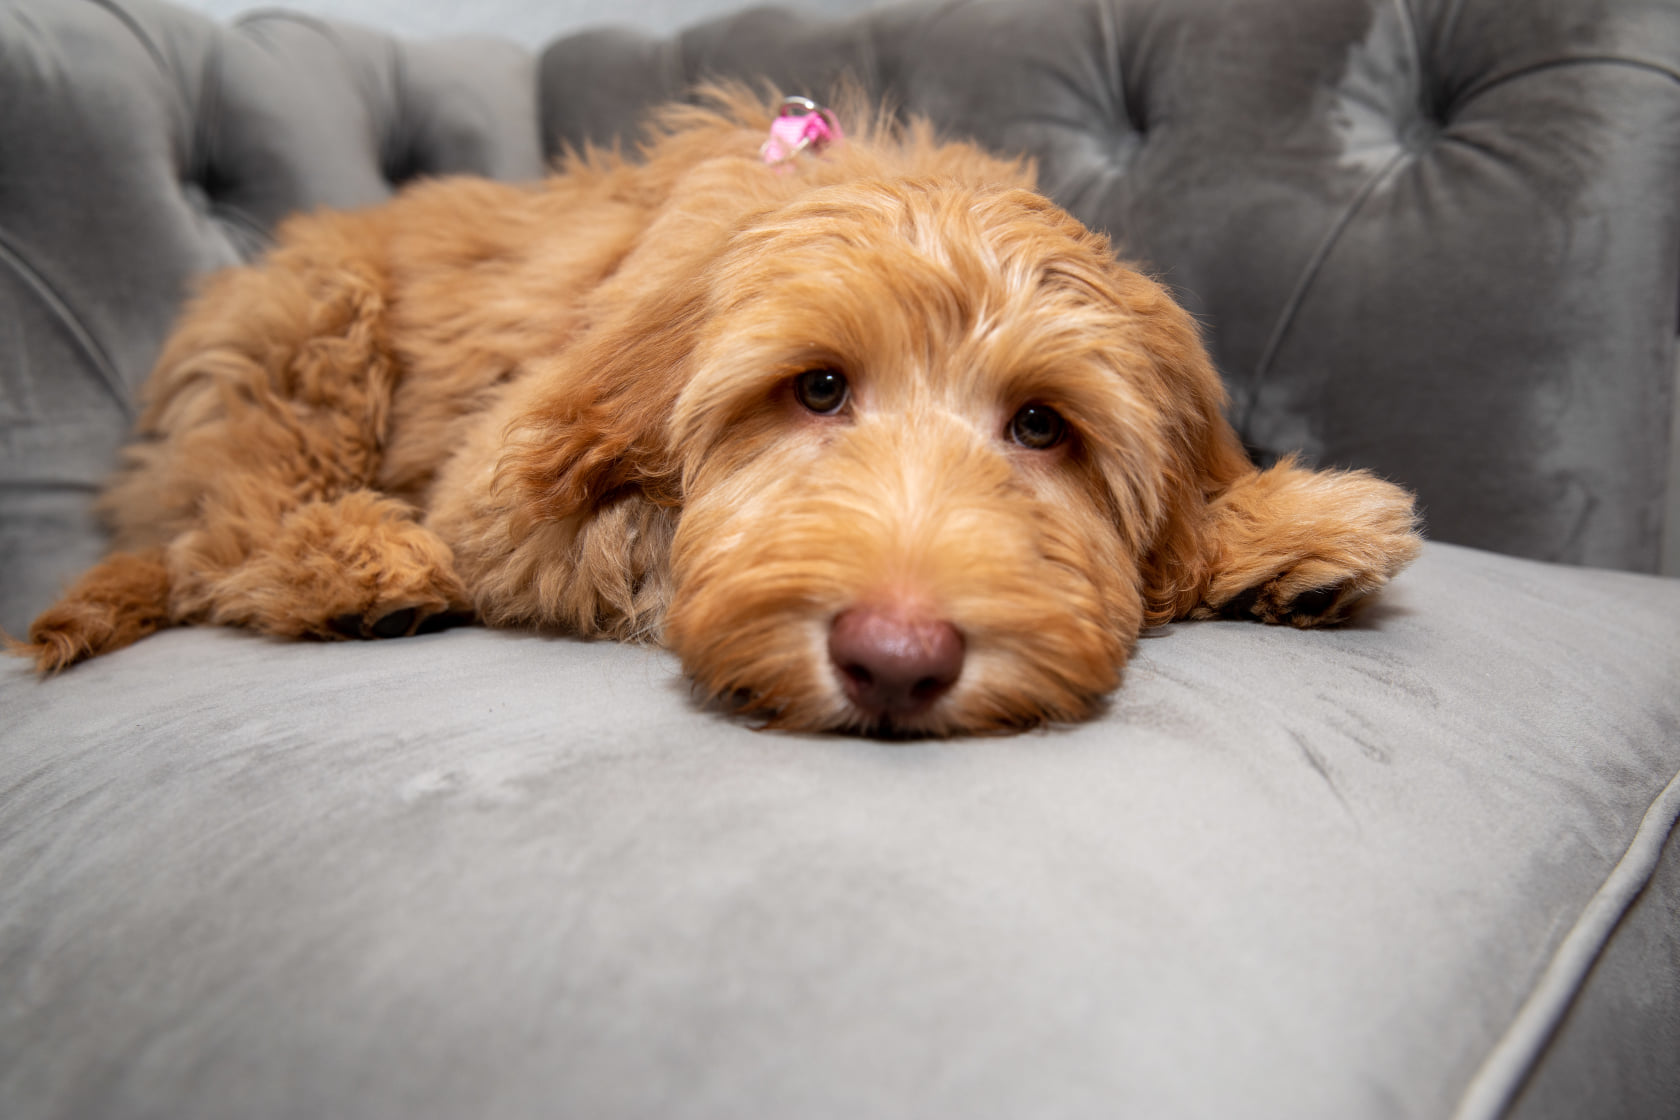 Cute dog laying on couch looking at camera